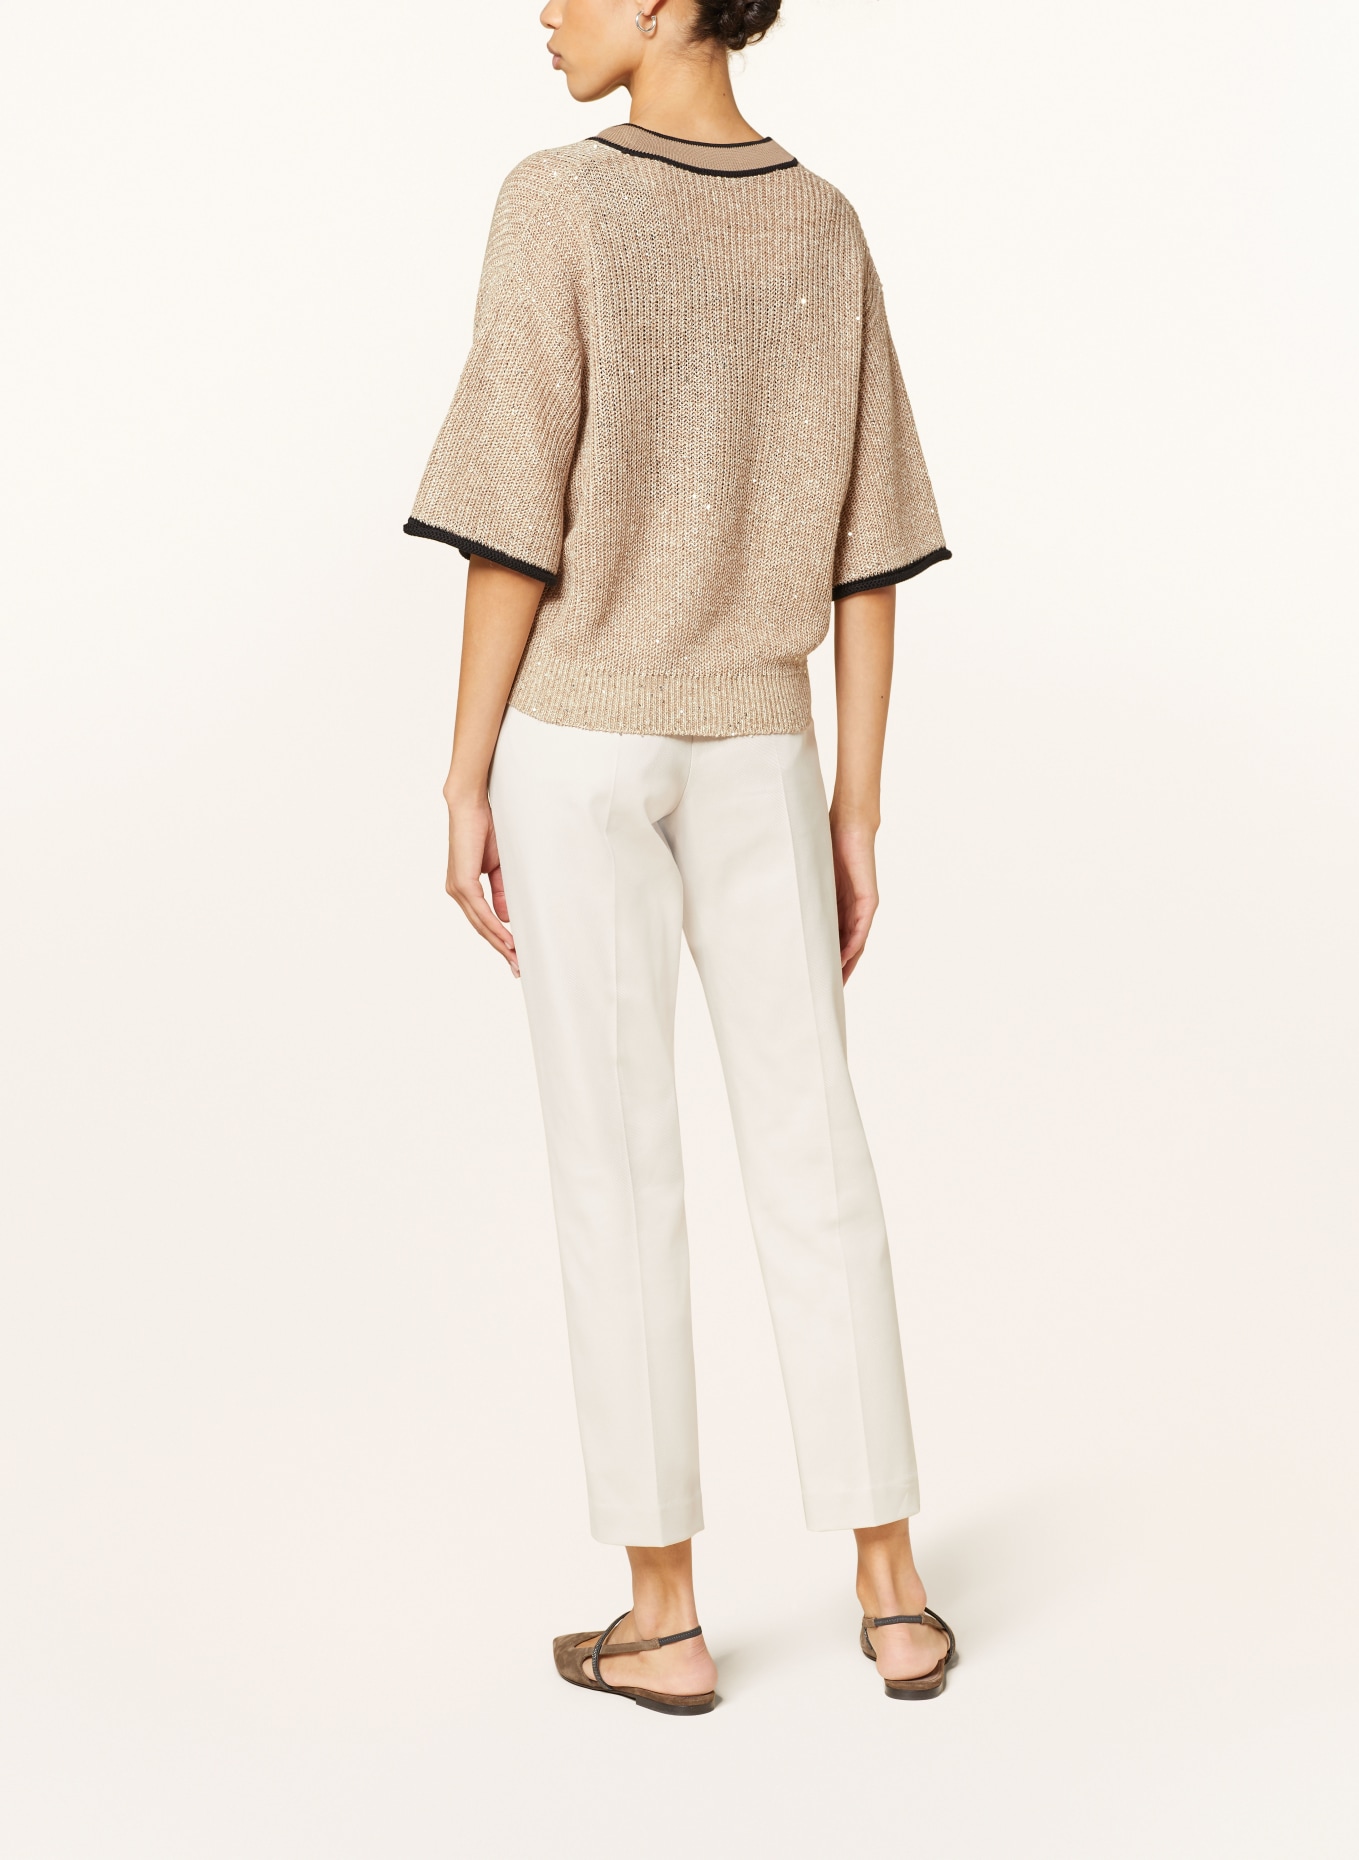 BRUNELLO CUCINELLI Cardigan made of linen with sequins, Color: CAMEL/ BLACK (Image 3)